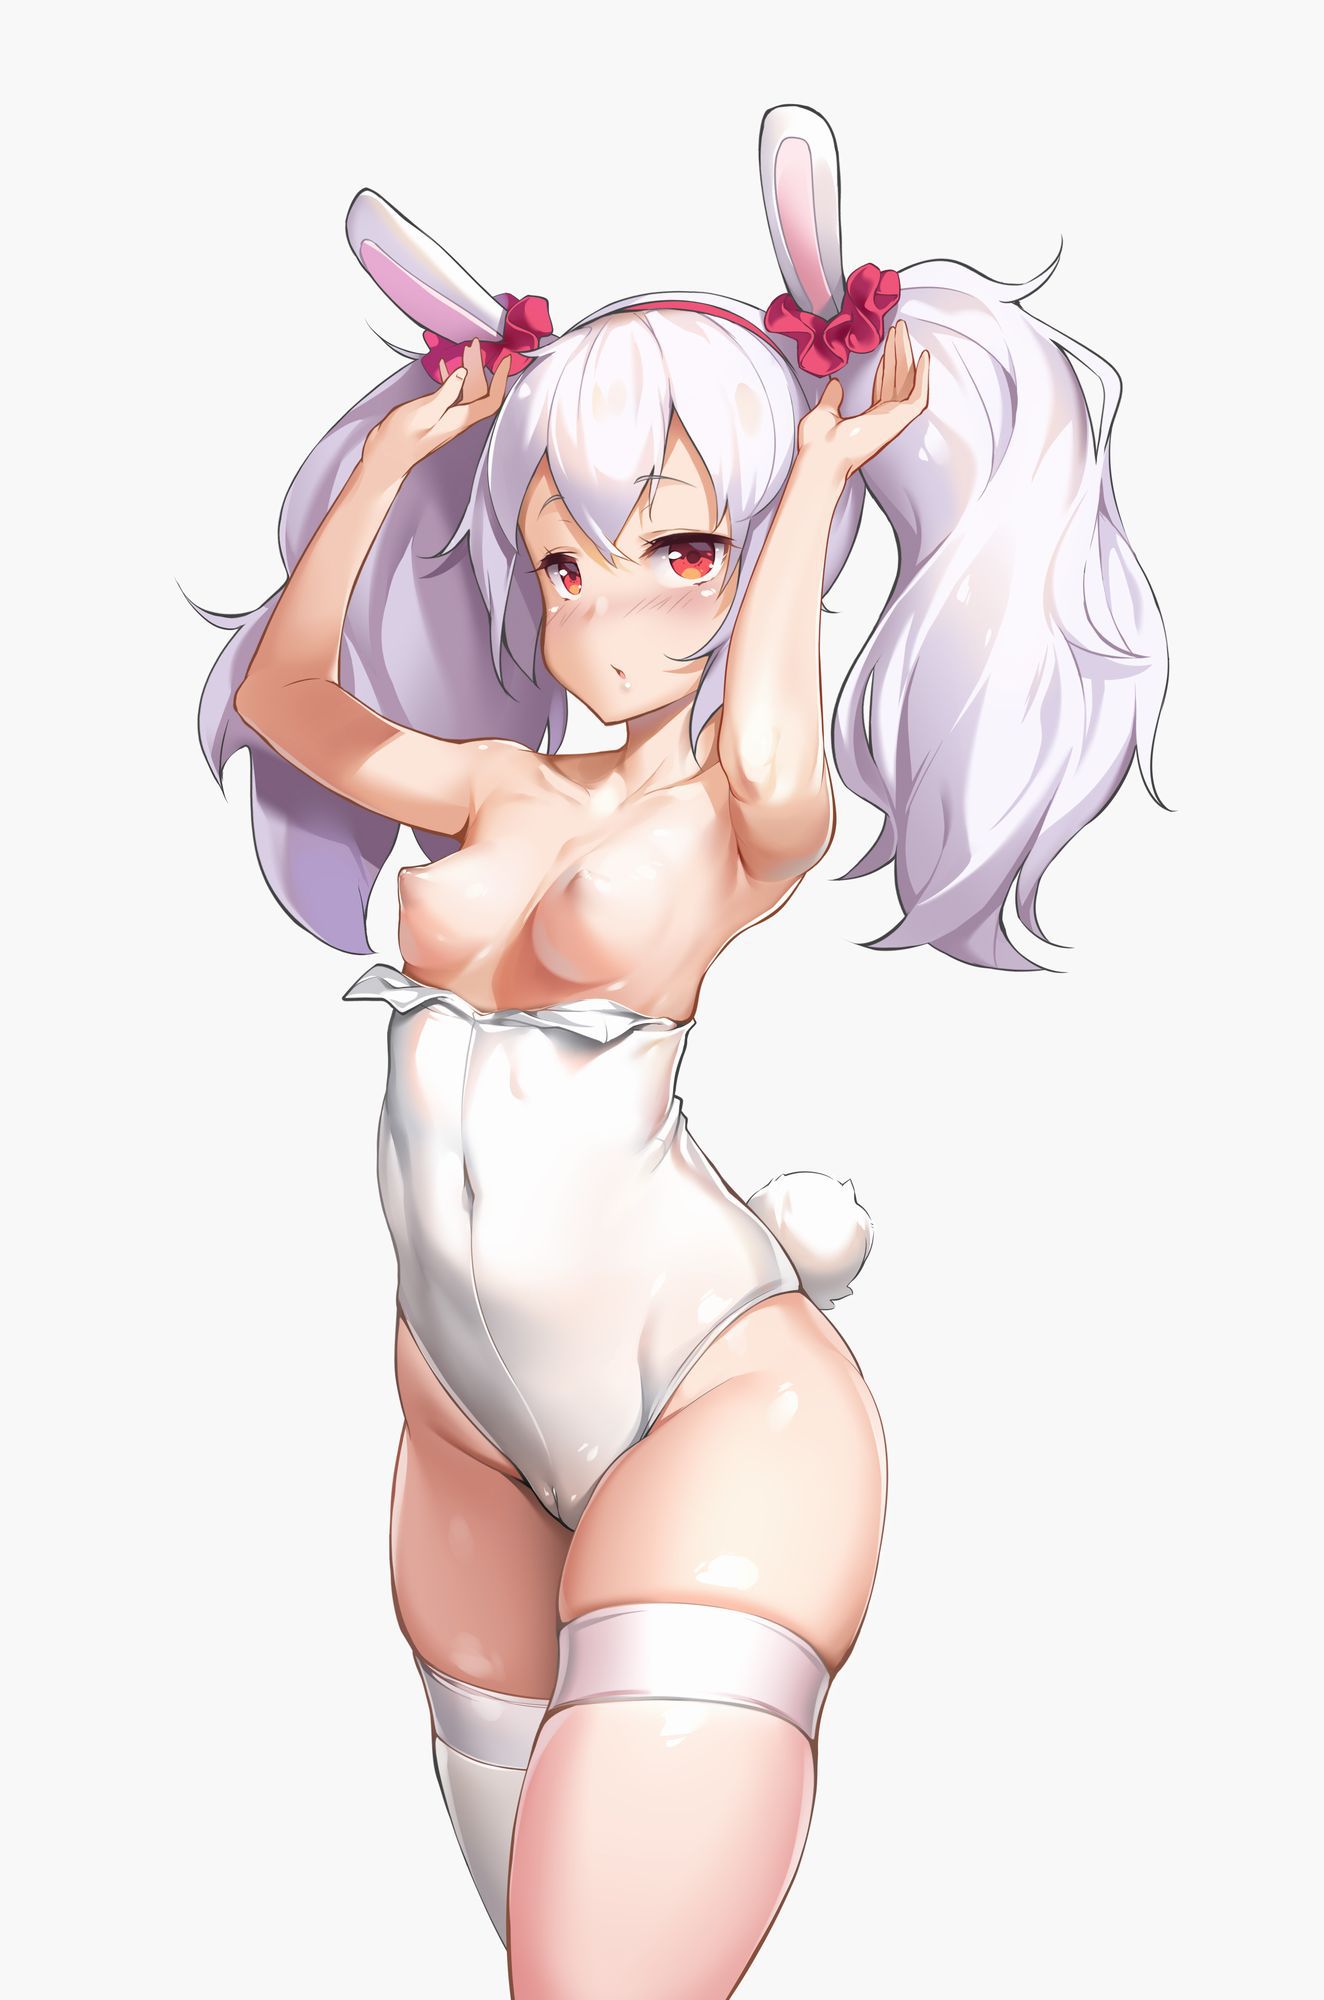 [Second] sexy bunny girl figure secondary erotic image part 35 [Bunny Girl] 20